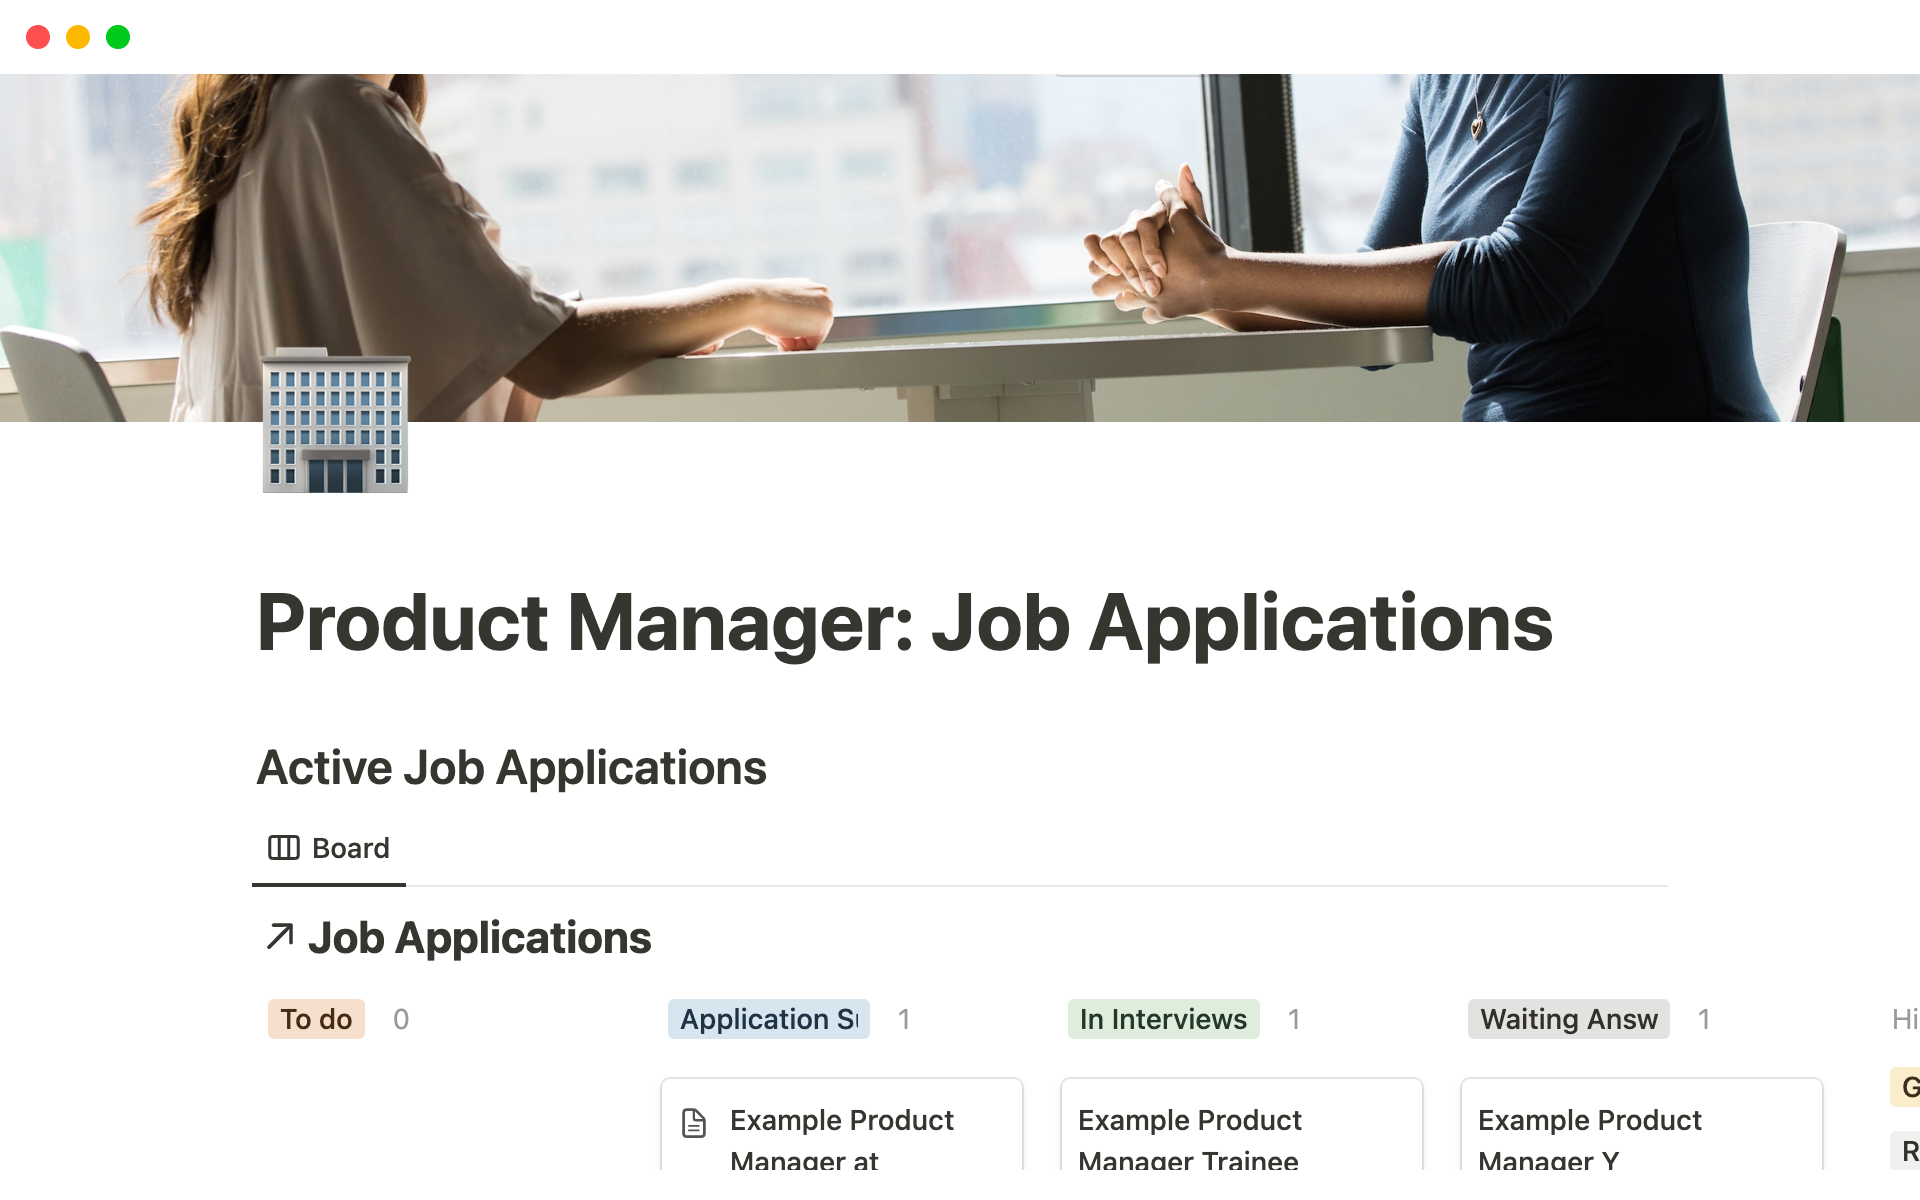 Organize and prepare job applications for Product Management